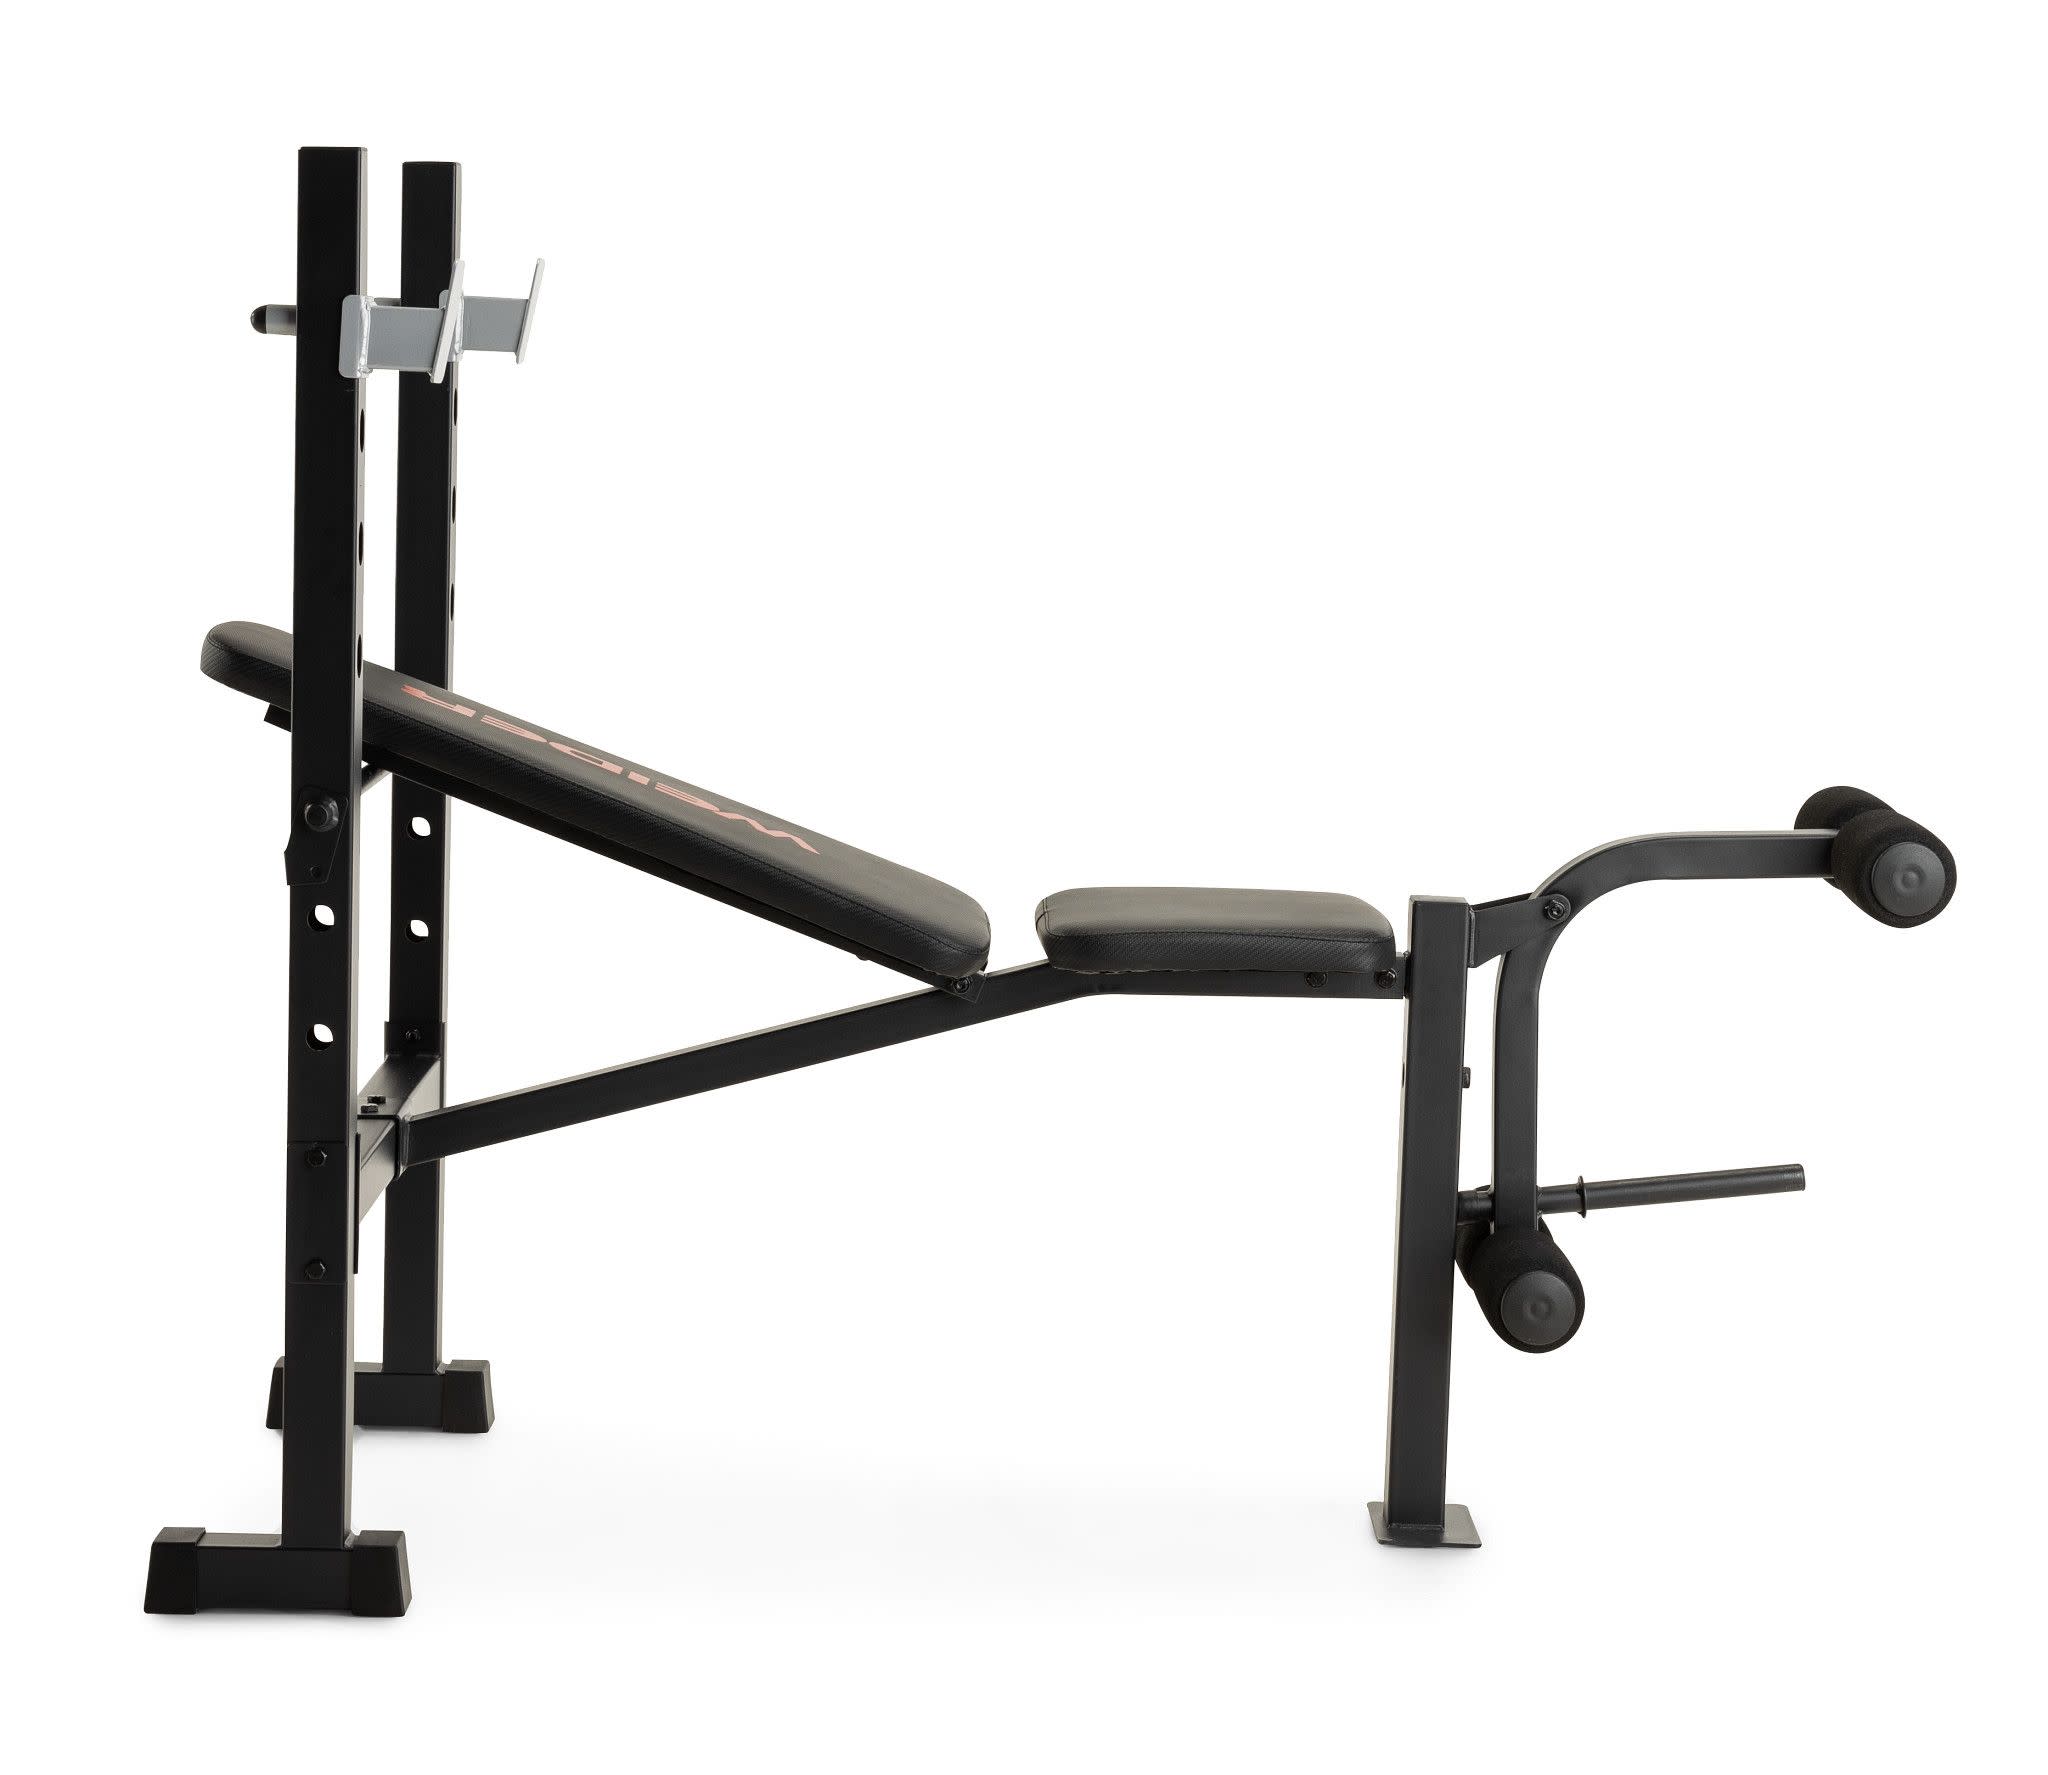 Weider Legacy Standard Bench and Rack, 410 Lb. Total Weight Capacity - image 5 of 23